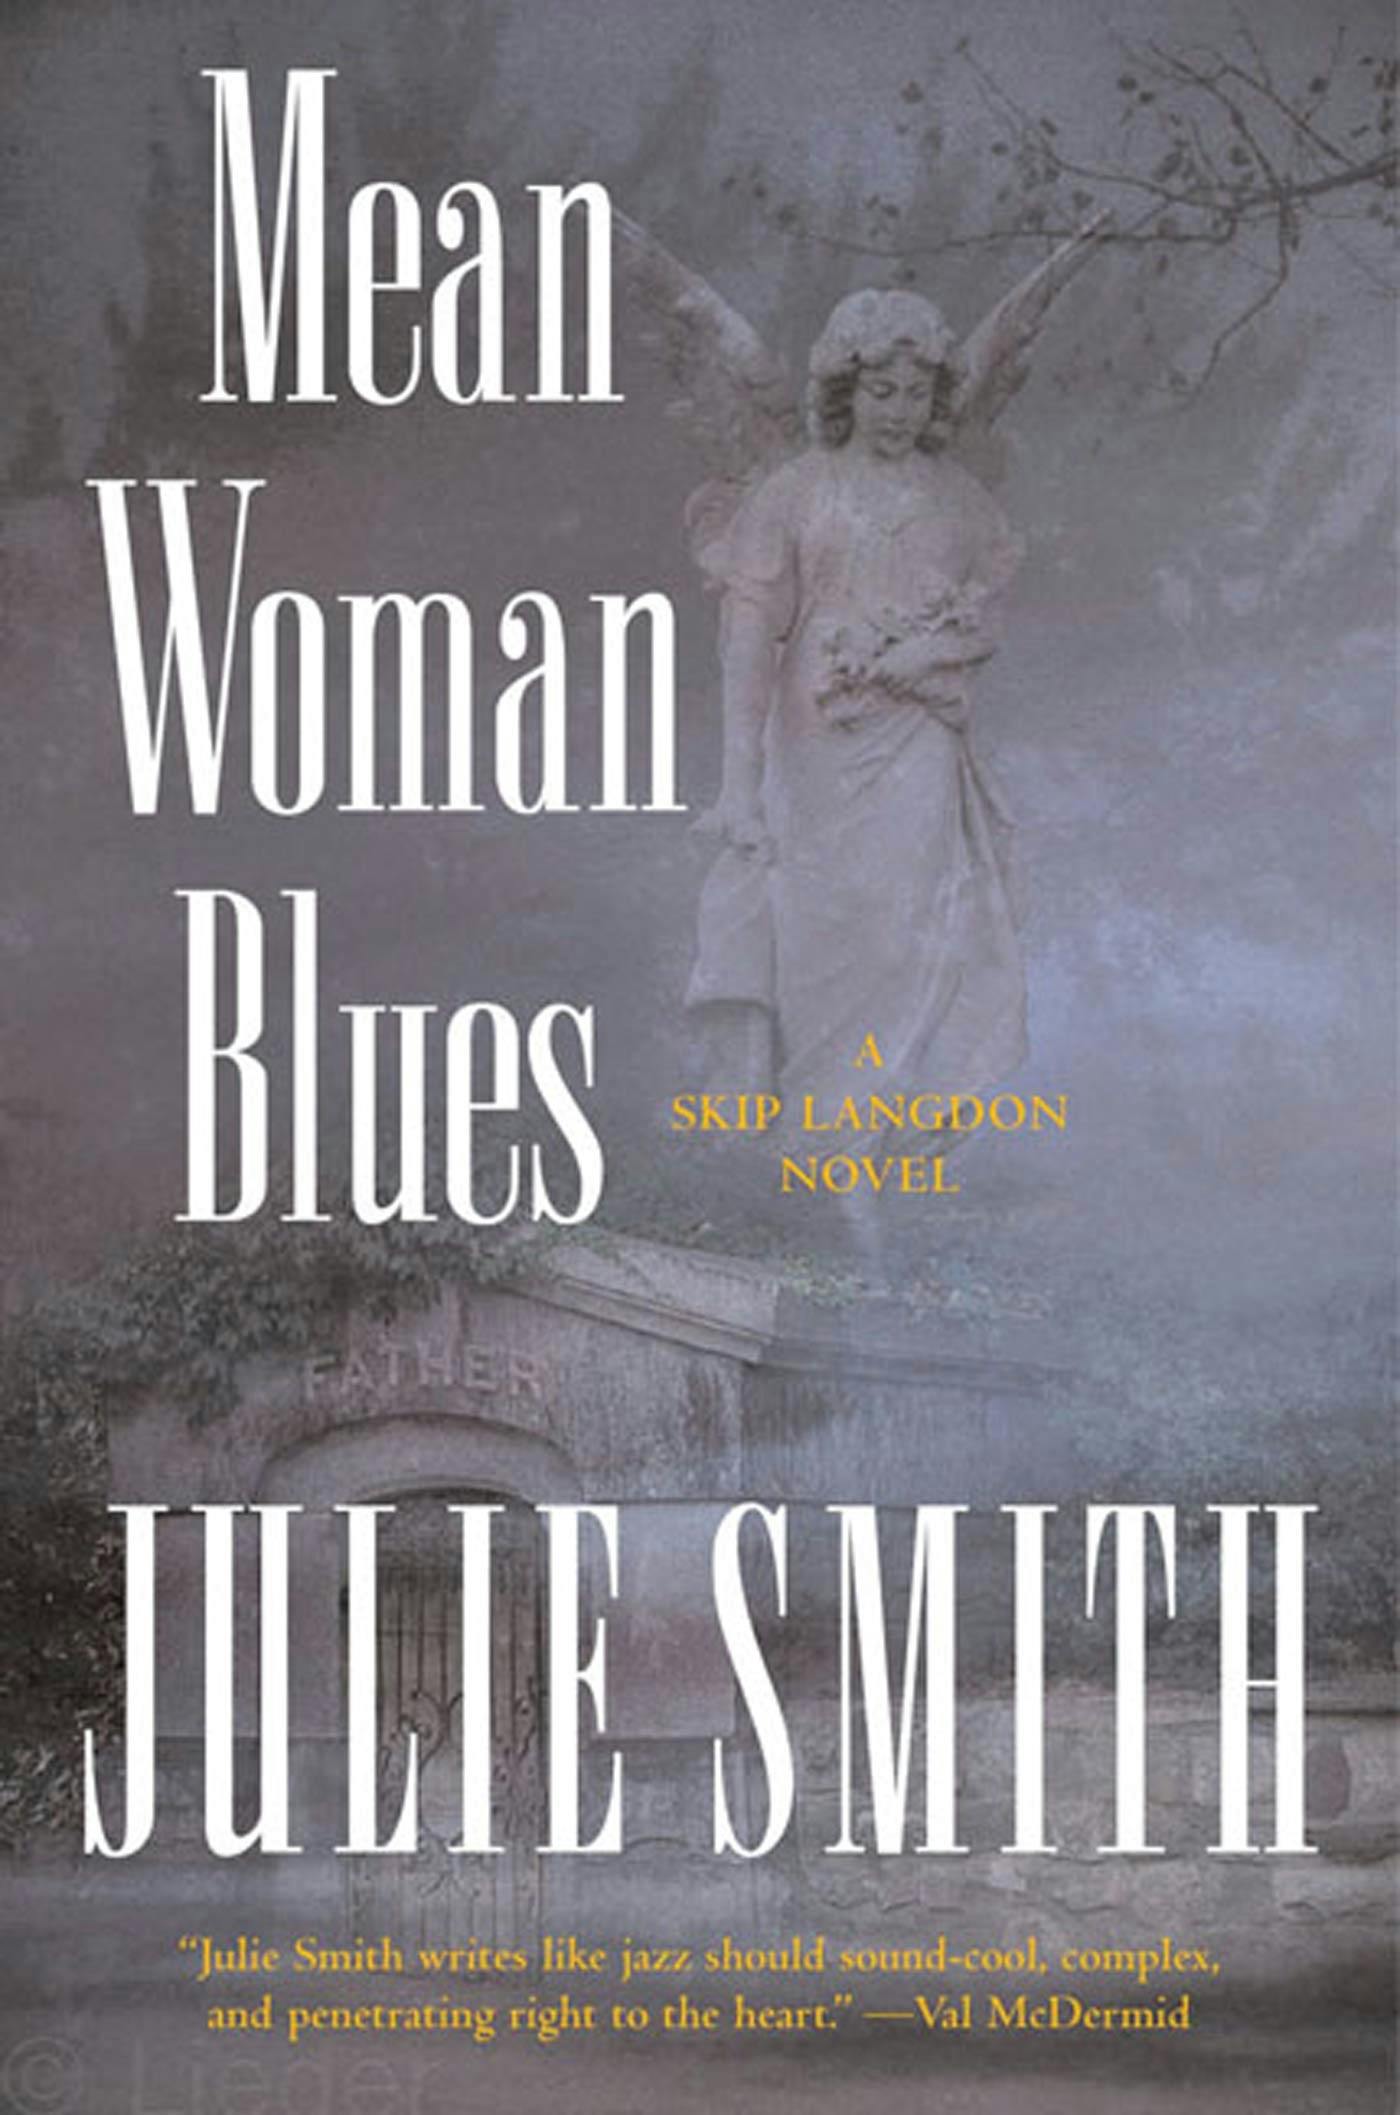 Cover for the book titled as: Mean Woman Blues